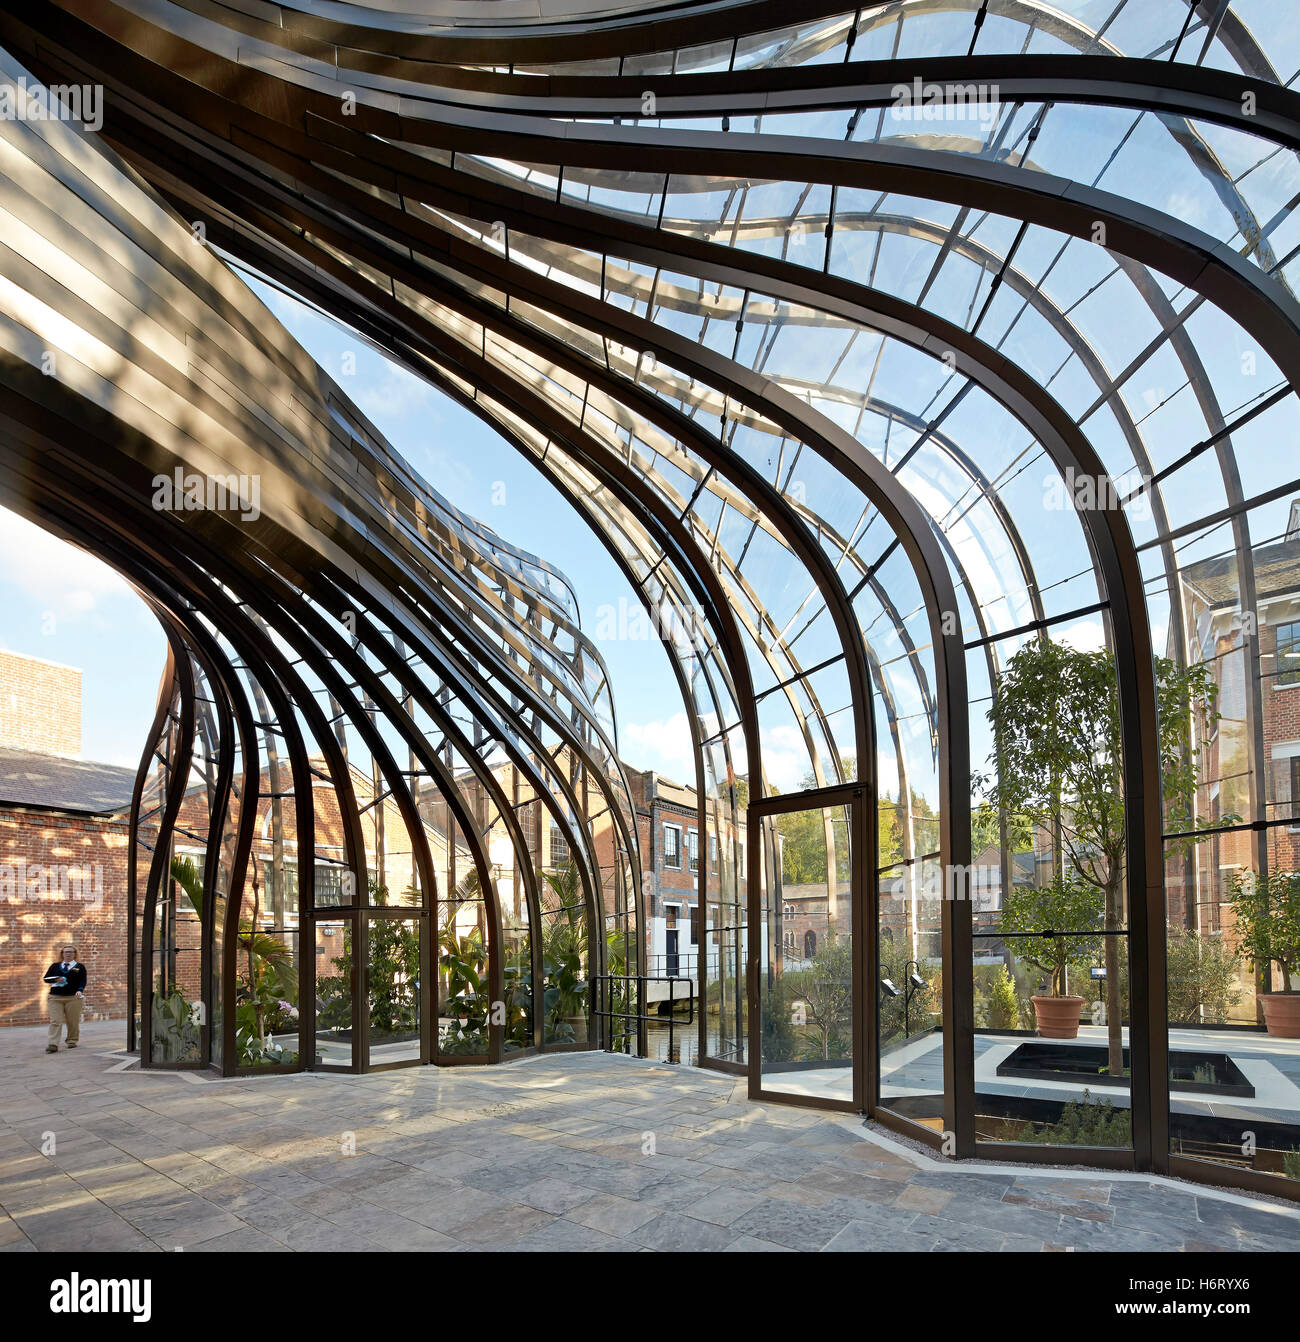 Curved greenhouse structures forming archway. Bombay Sapphire ...